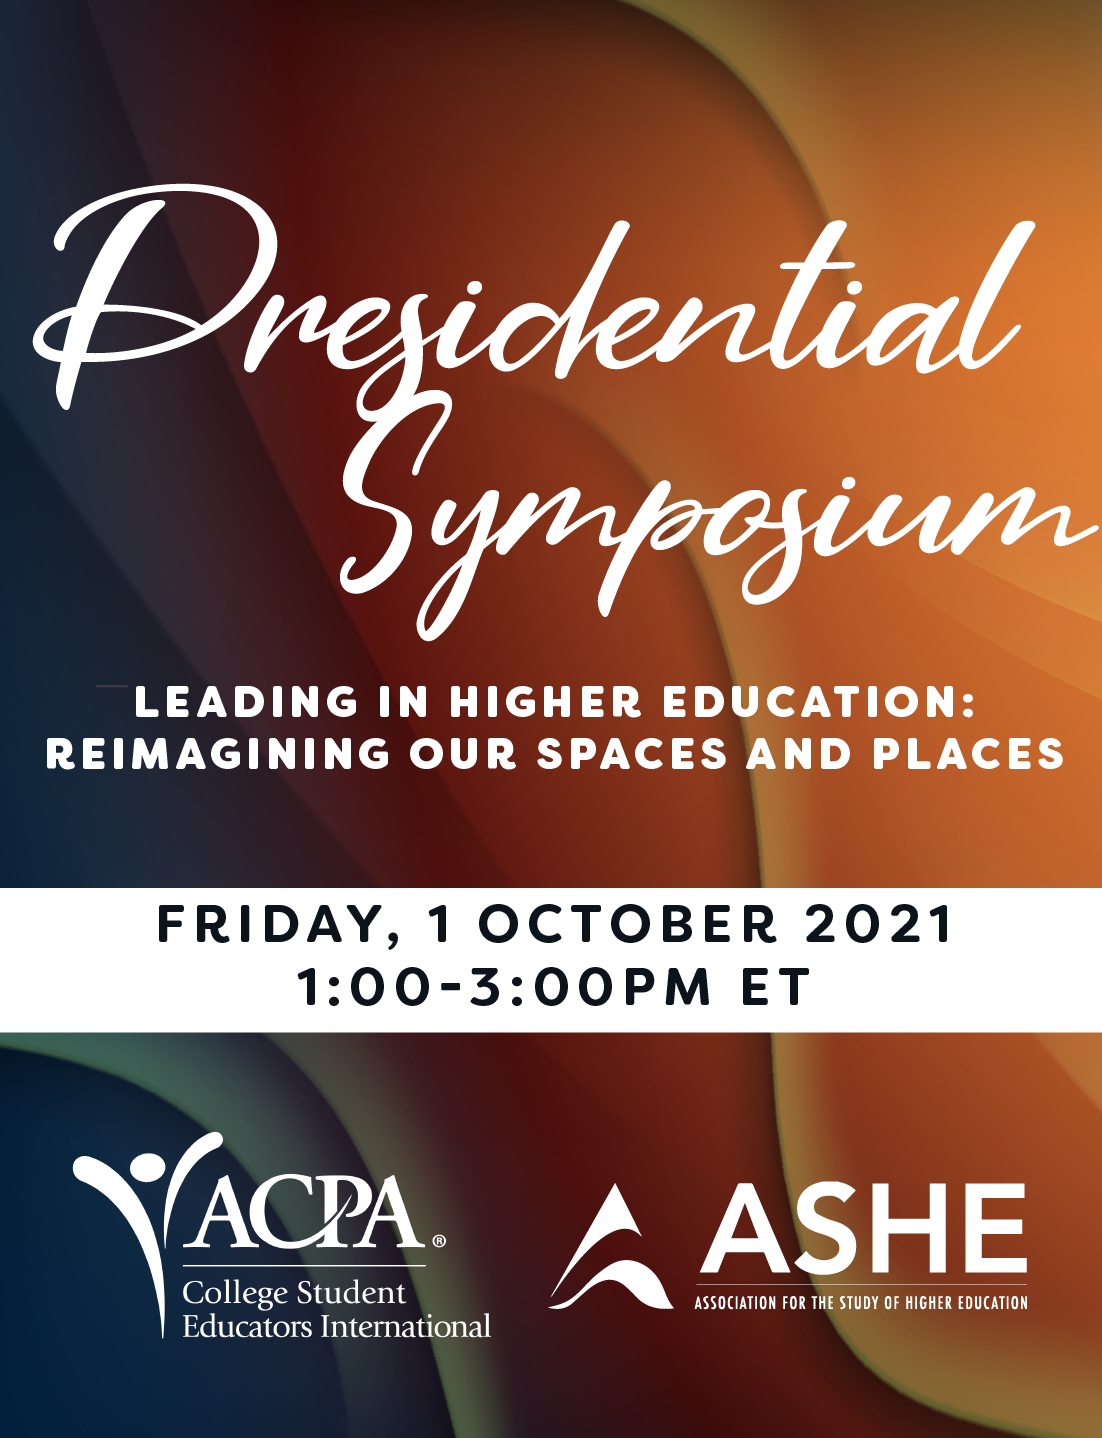 Presidential Symposium Leading in Higher Education: Reimagining Our Spaces and Places. FRIDAY, 1 OCTOBER 2020 1:00-3:00PM ET. ACPA & ASHE logos.